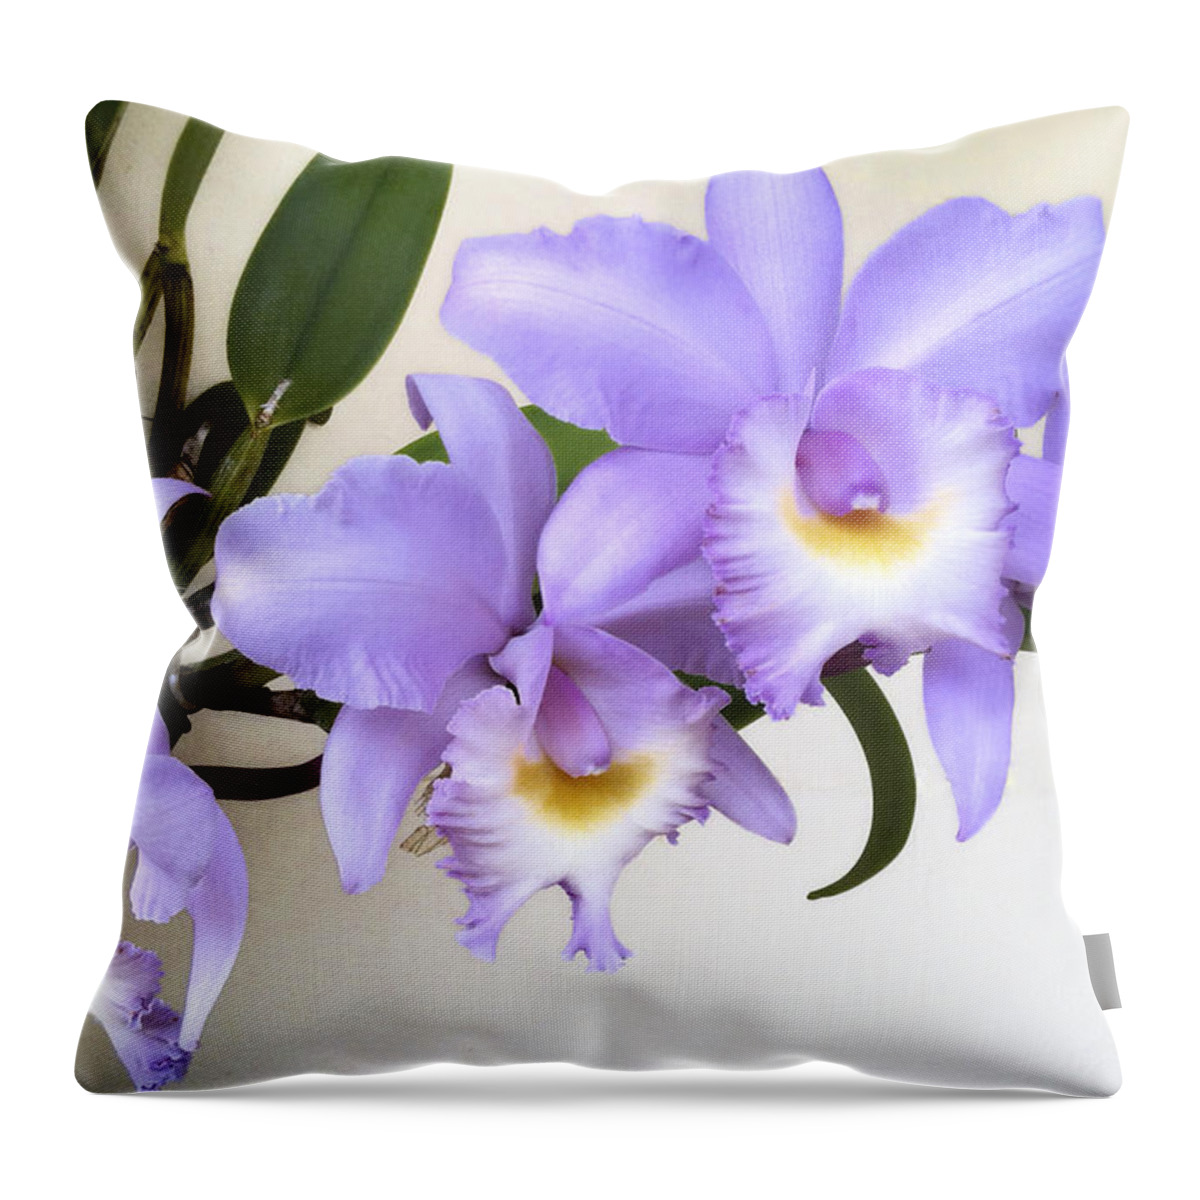 Orchid Throw Pillow featuring the photograph Cattleya Orchid by Bradford Martin